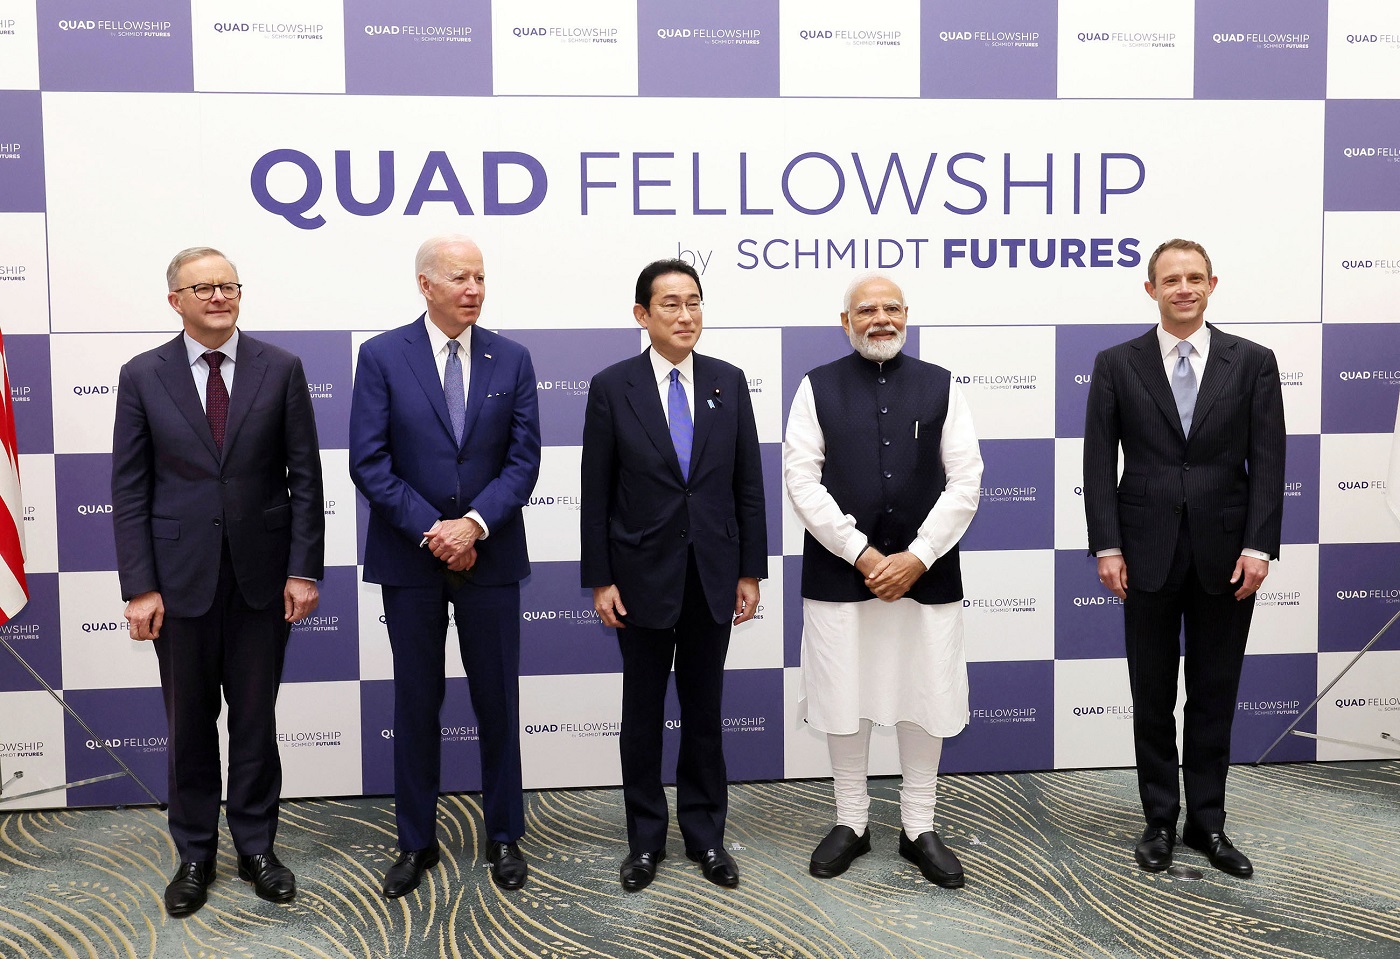 Photograph of an event to celebrate the establishment of the Quad Fellowship (2)